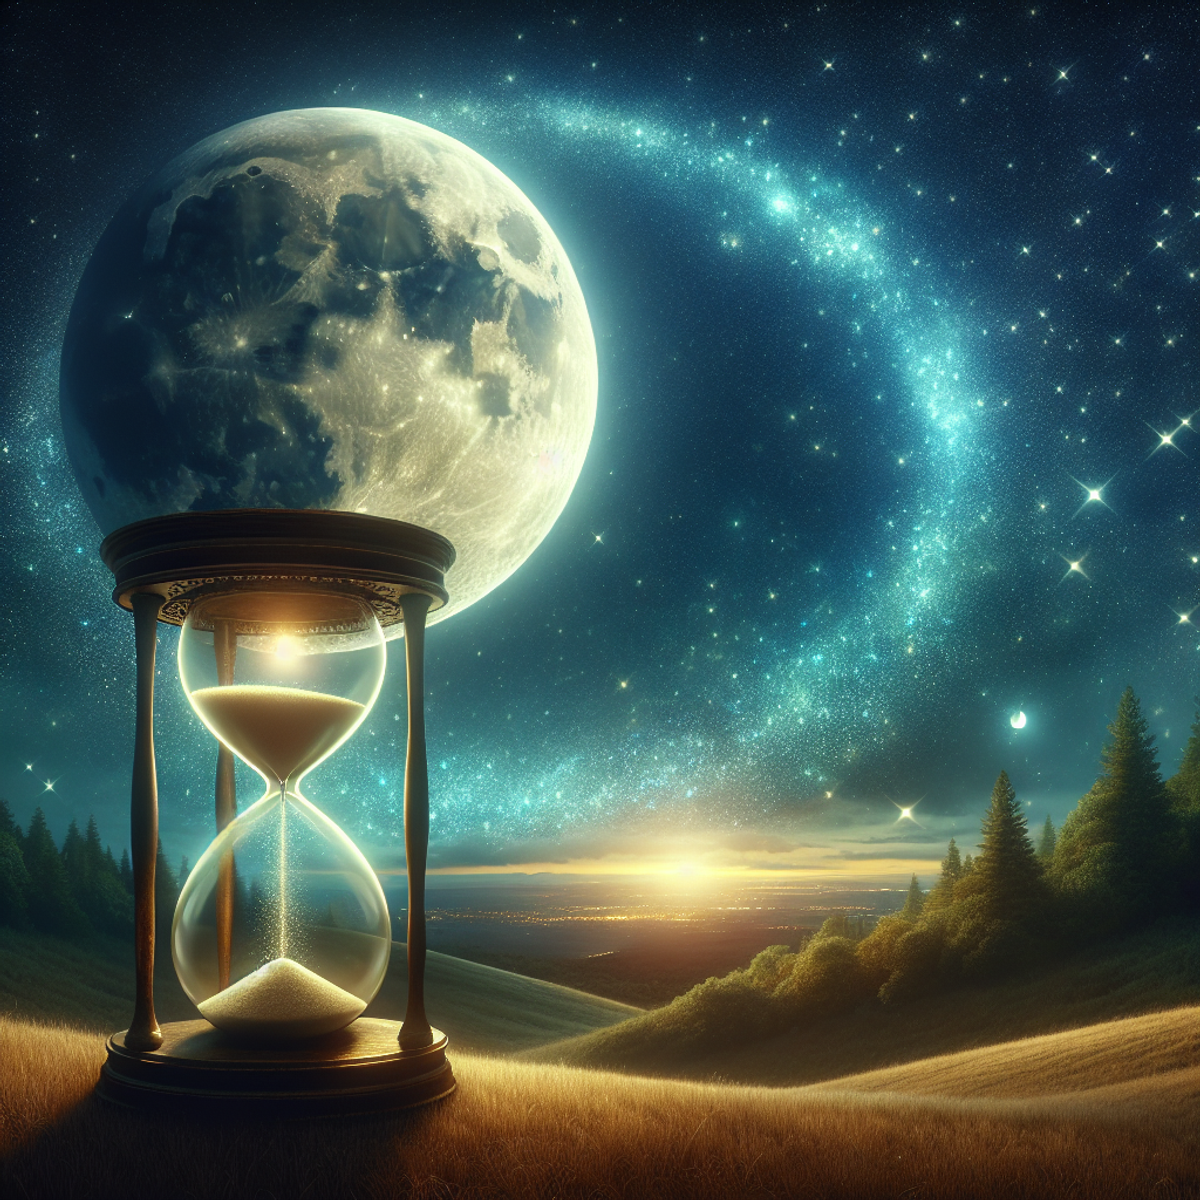 An antique hourglass in a serene landscape with a glowing moon and starlit night sky.